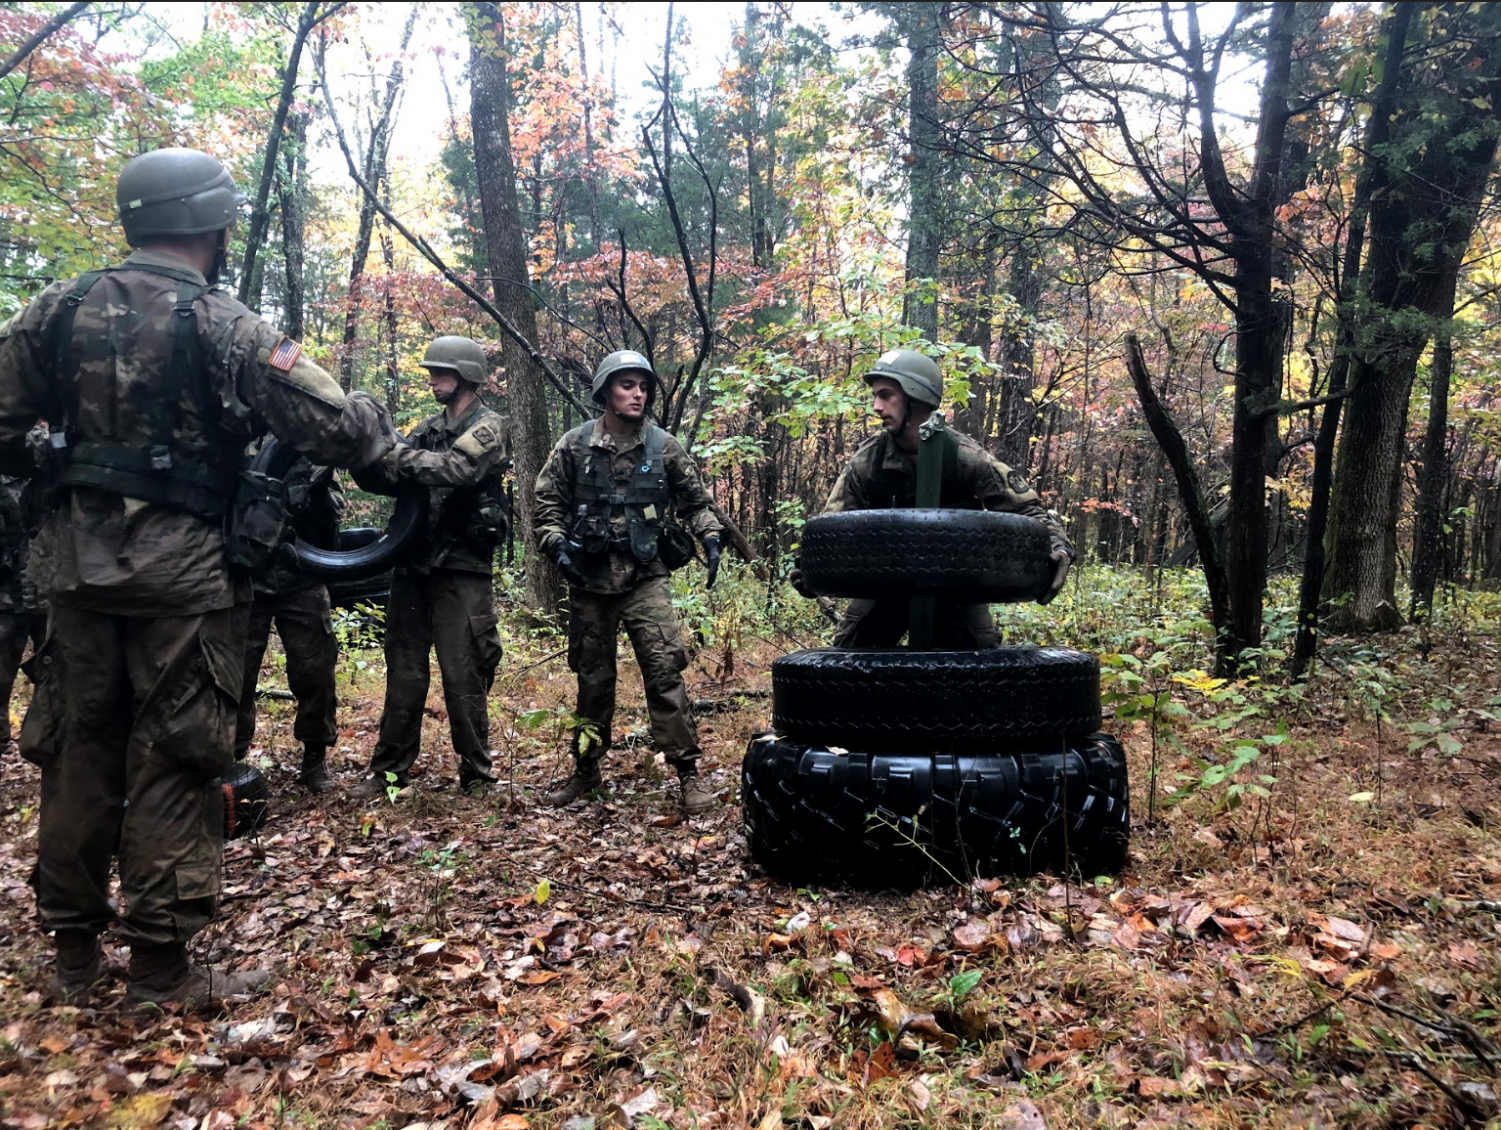 Cadets competing in the “Tower of Tires” challenge, a timed puzzle with strict rules in which numbered tires of varying sizes and weights must be transferred from pillar to pillar (Photo by Thomas Hum)